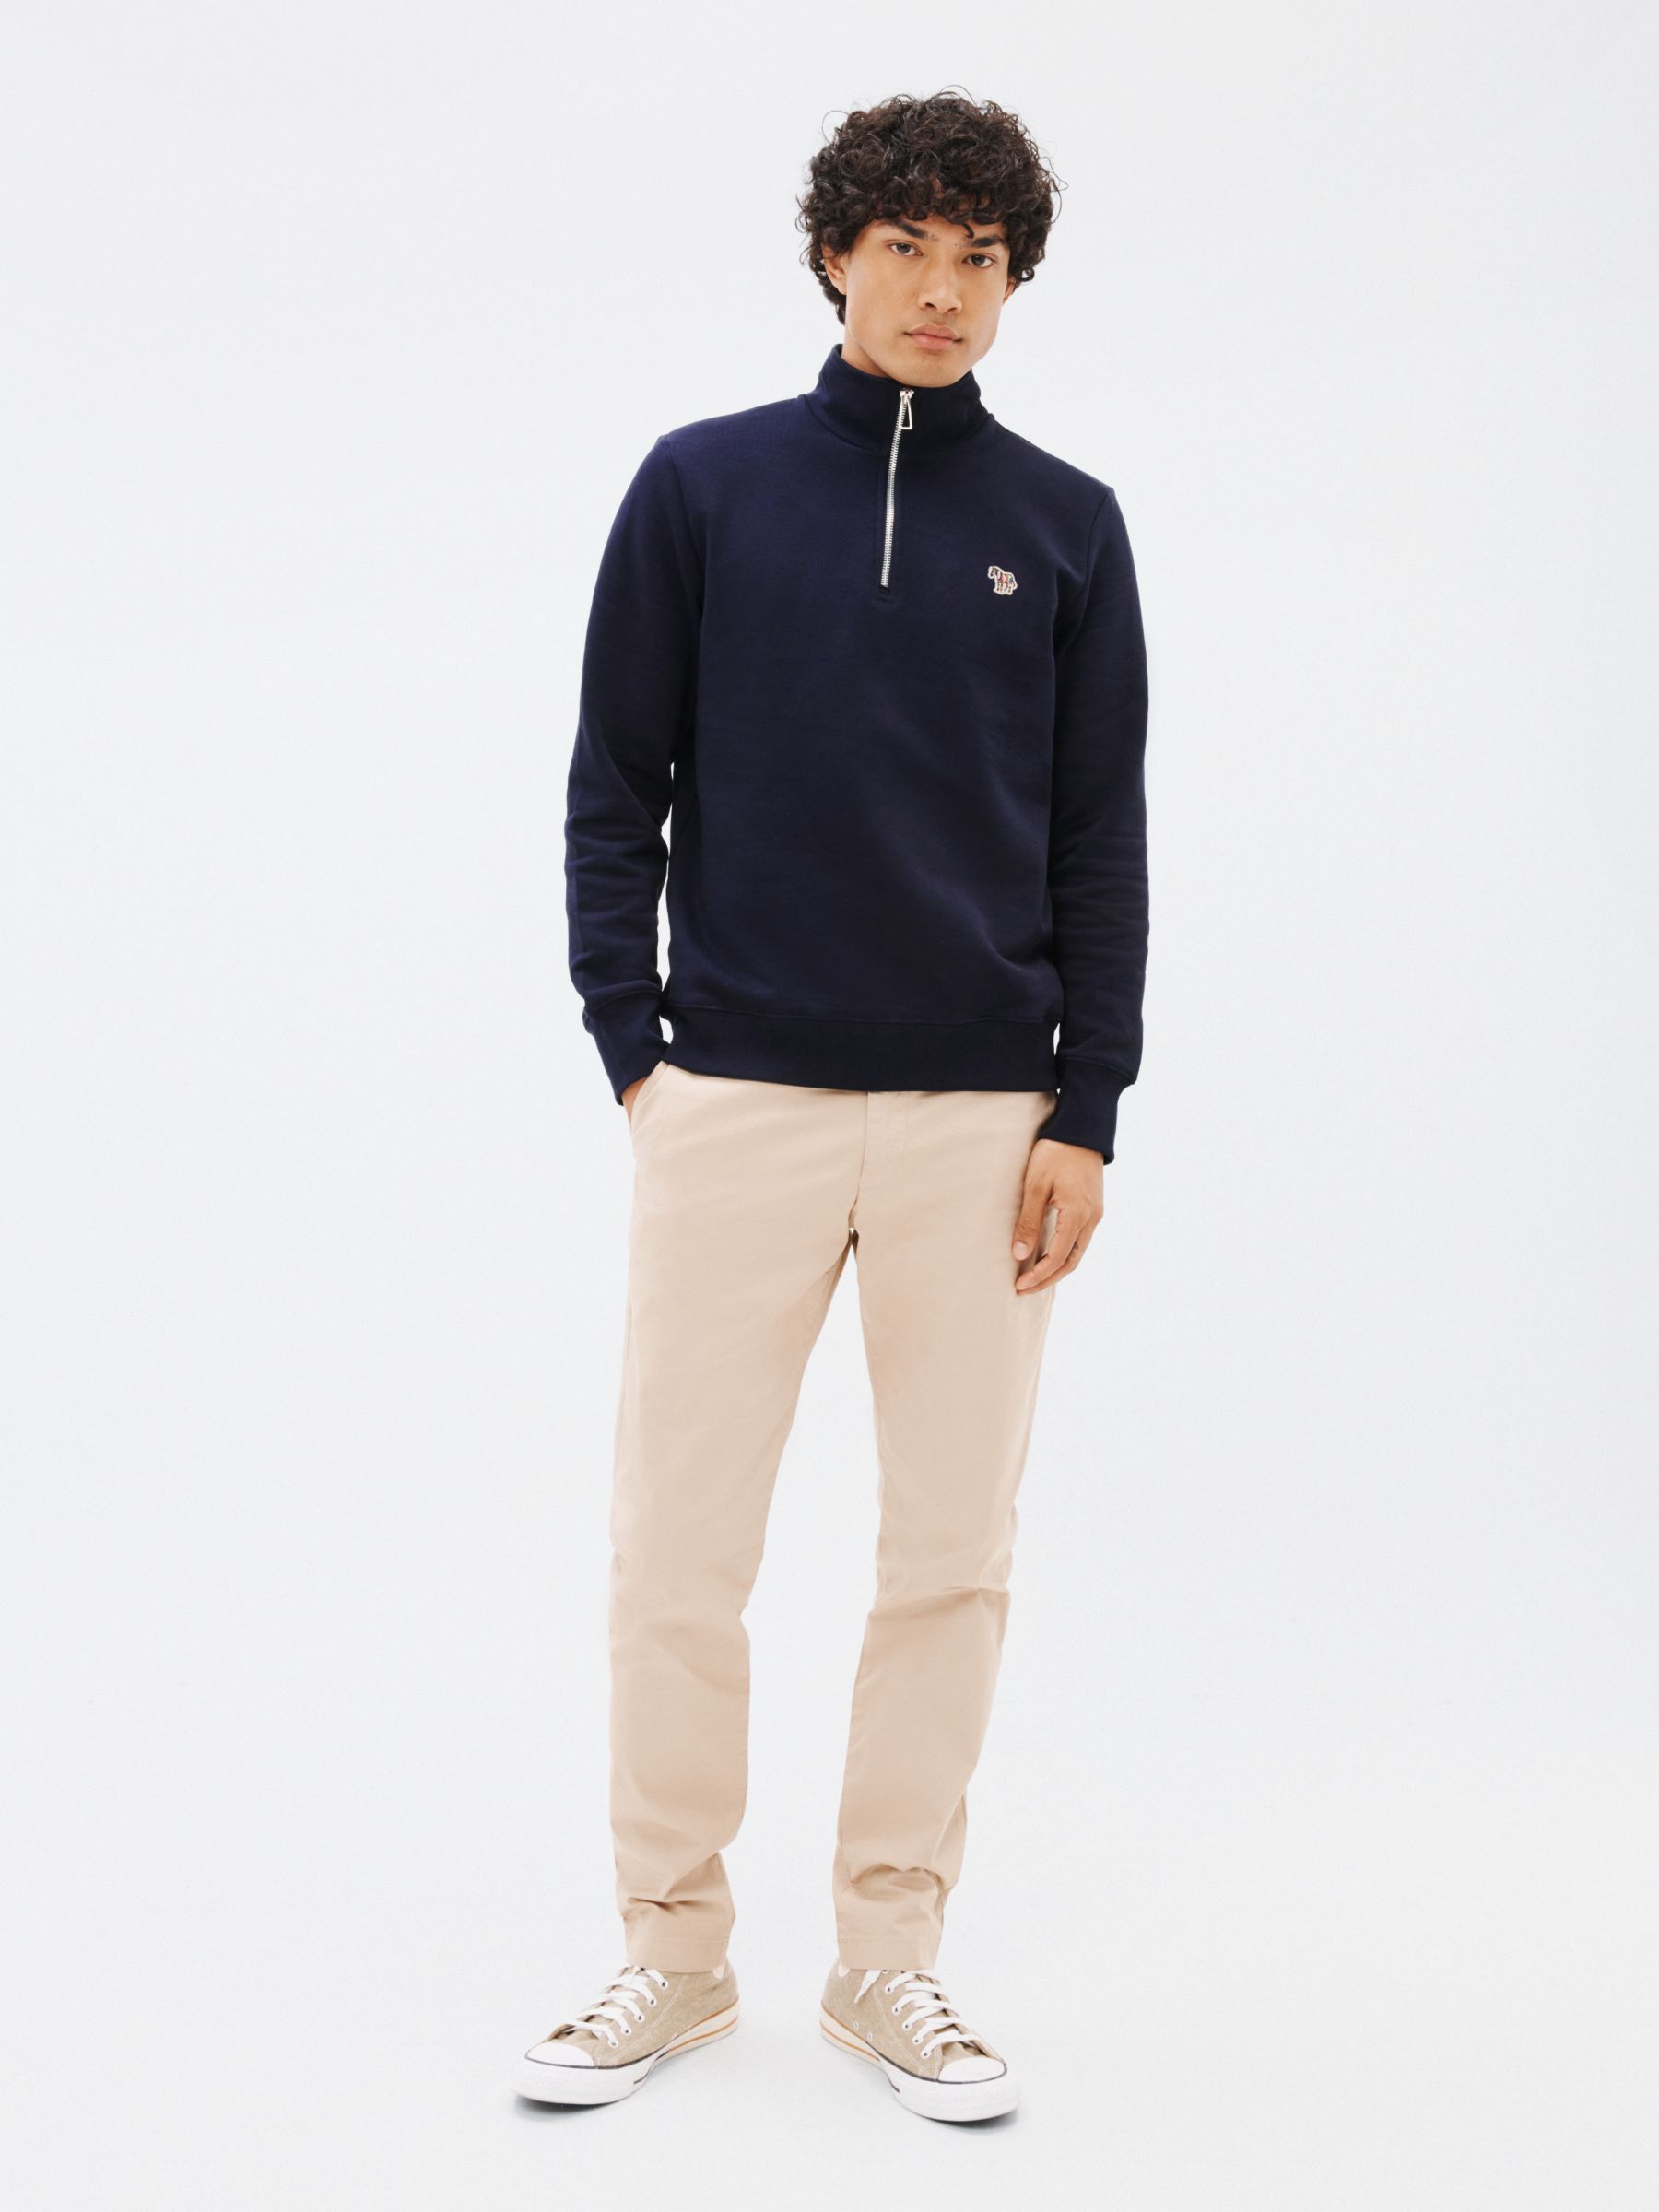 Buy PS Paul Smith Zebra Embroidered Zip Neck Jumper, Blues Online at johnlewis.com